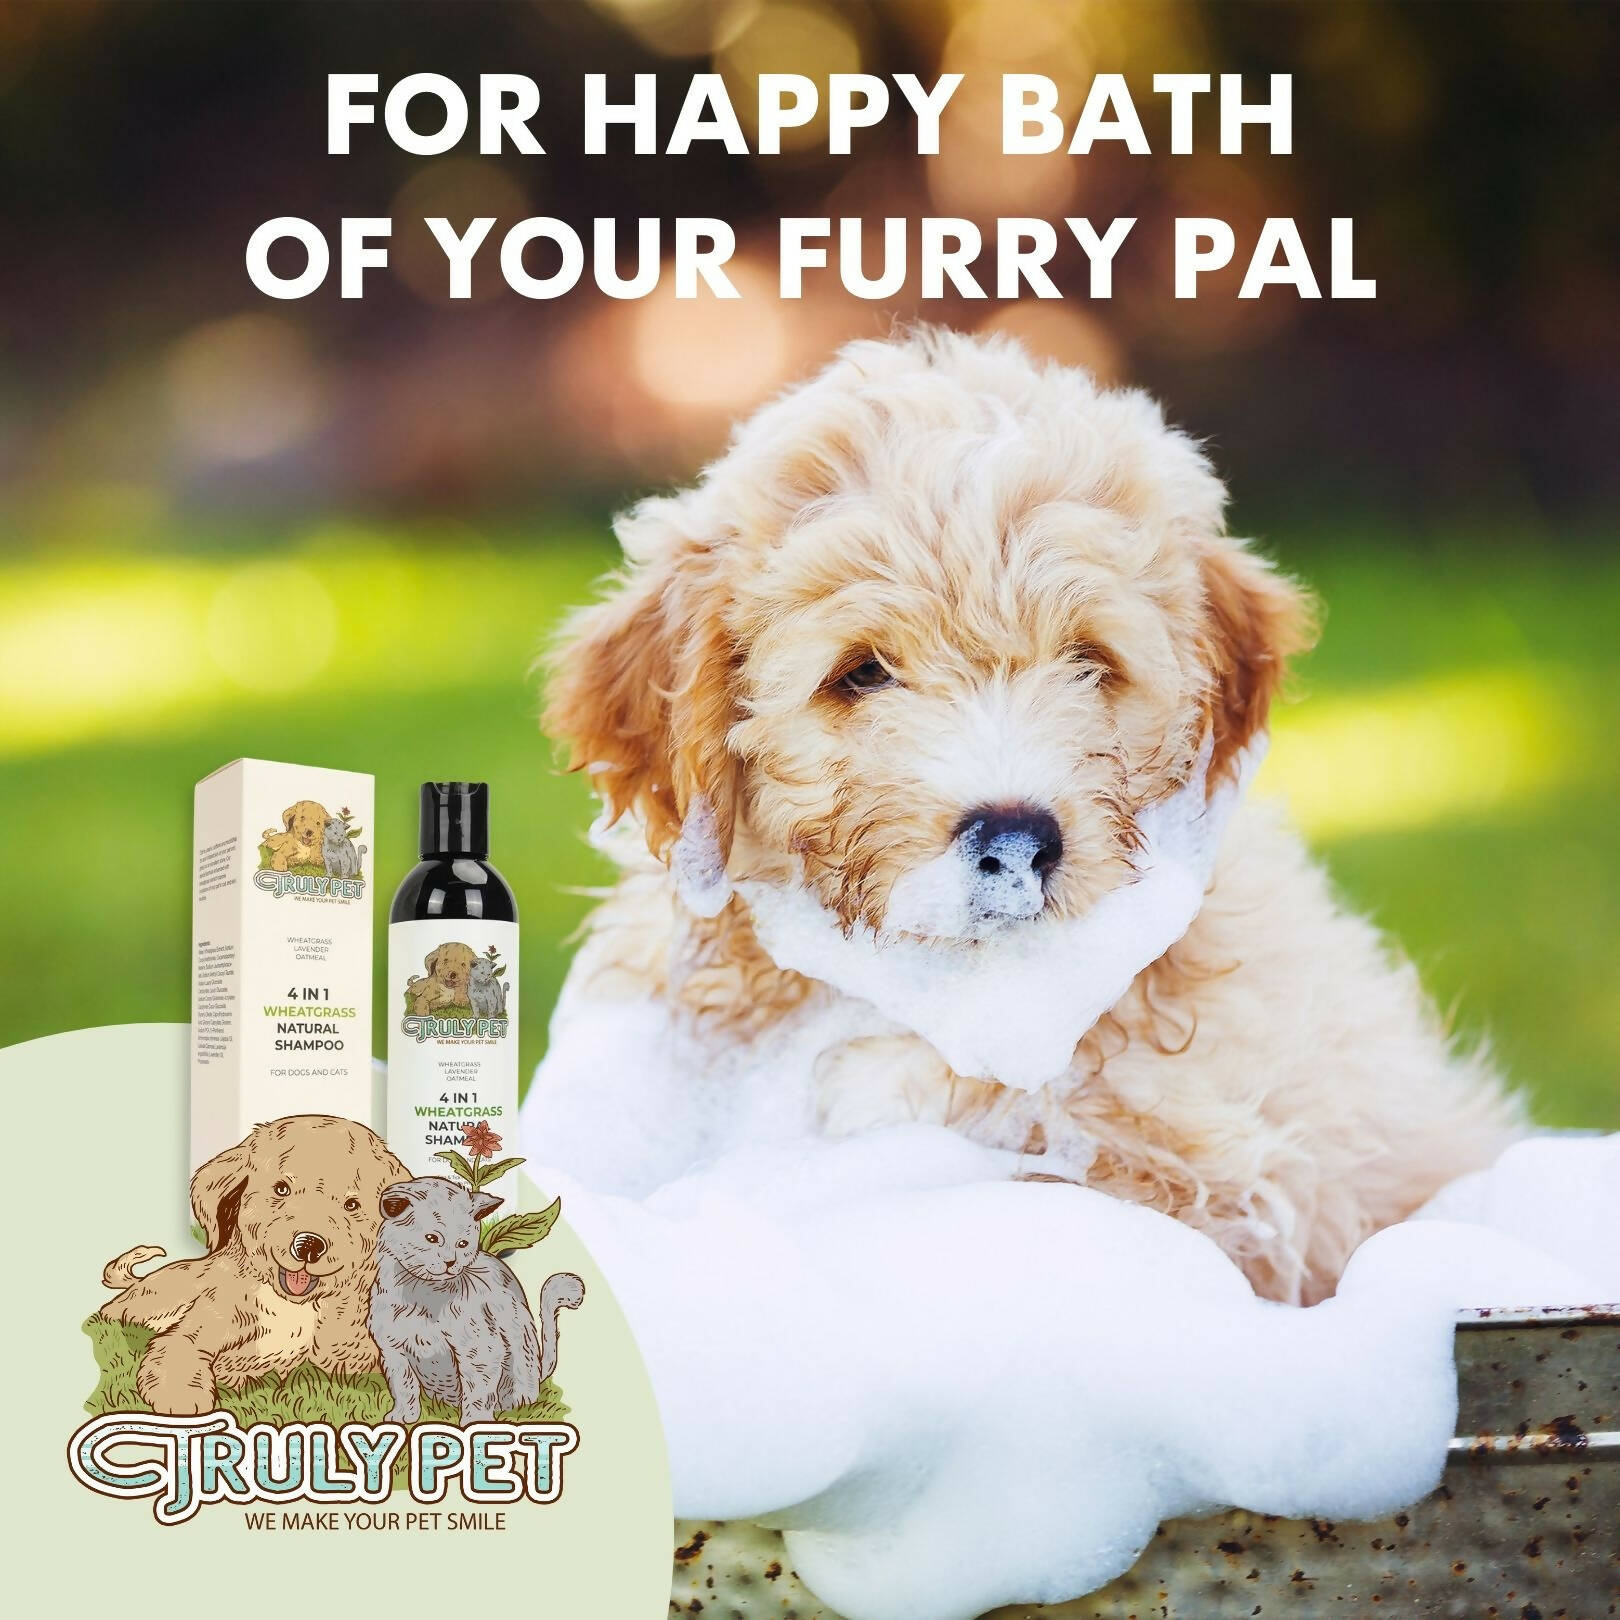 [TRULYPET] UP TO 55% OFF - Wheatgrass Natural Oils Shampoo for Dogs & Cats - Wheatgrass Lavender Oatmeal[ 프리미엄 네쥬널 애견 샴푸]